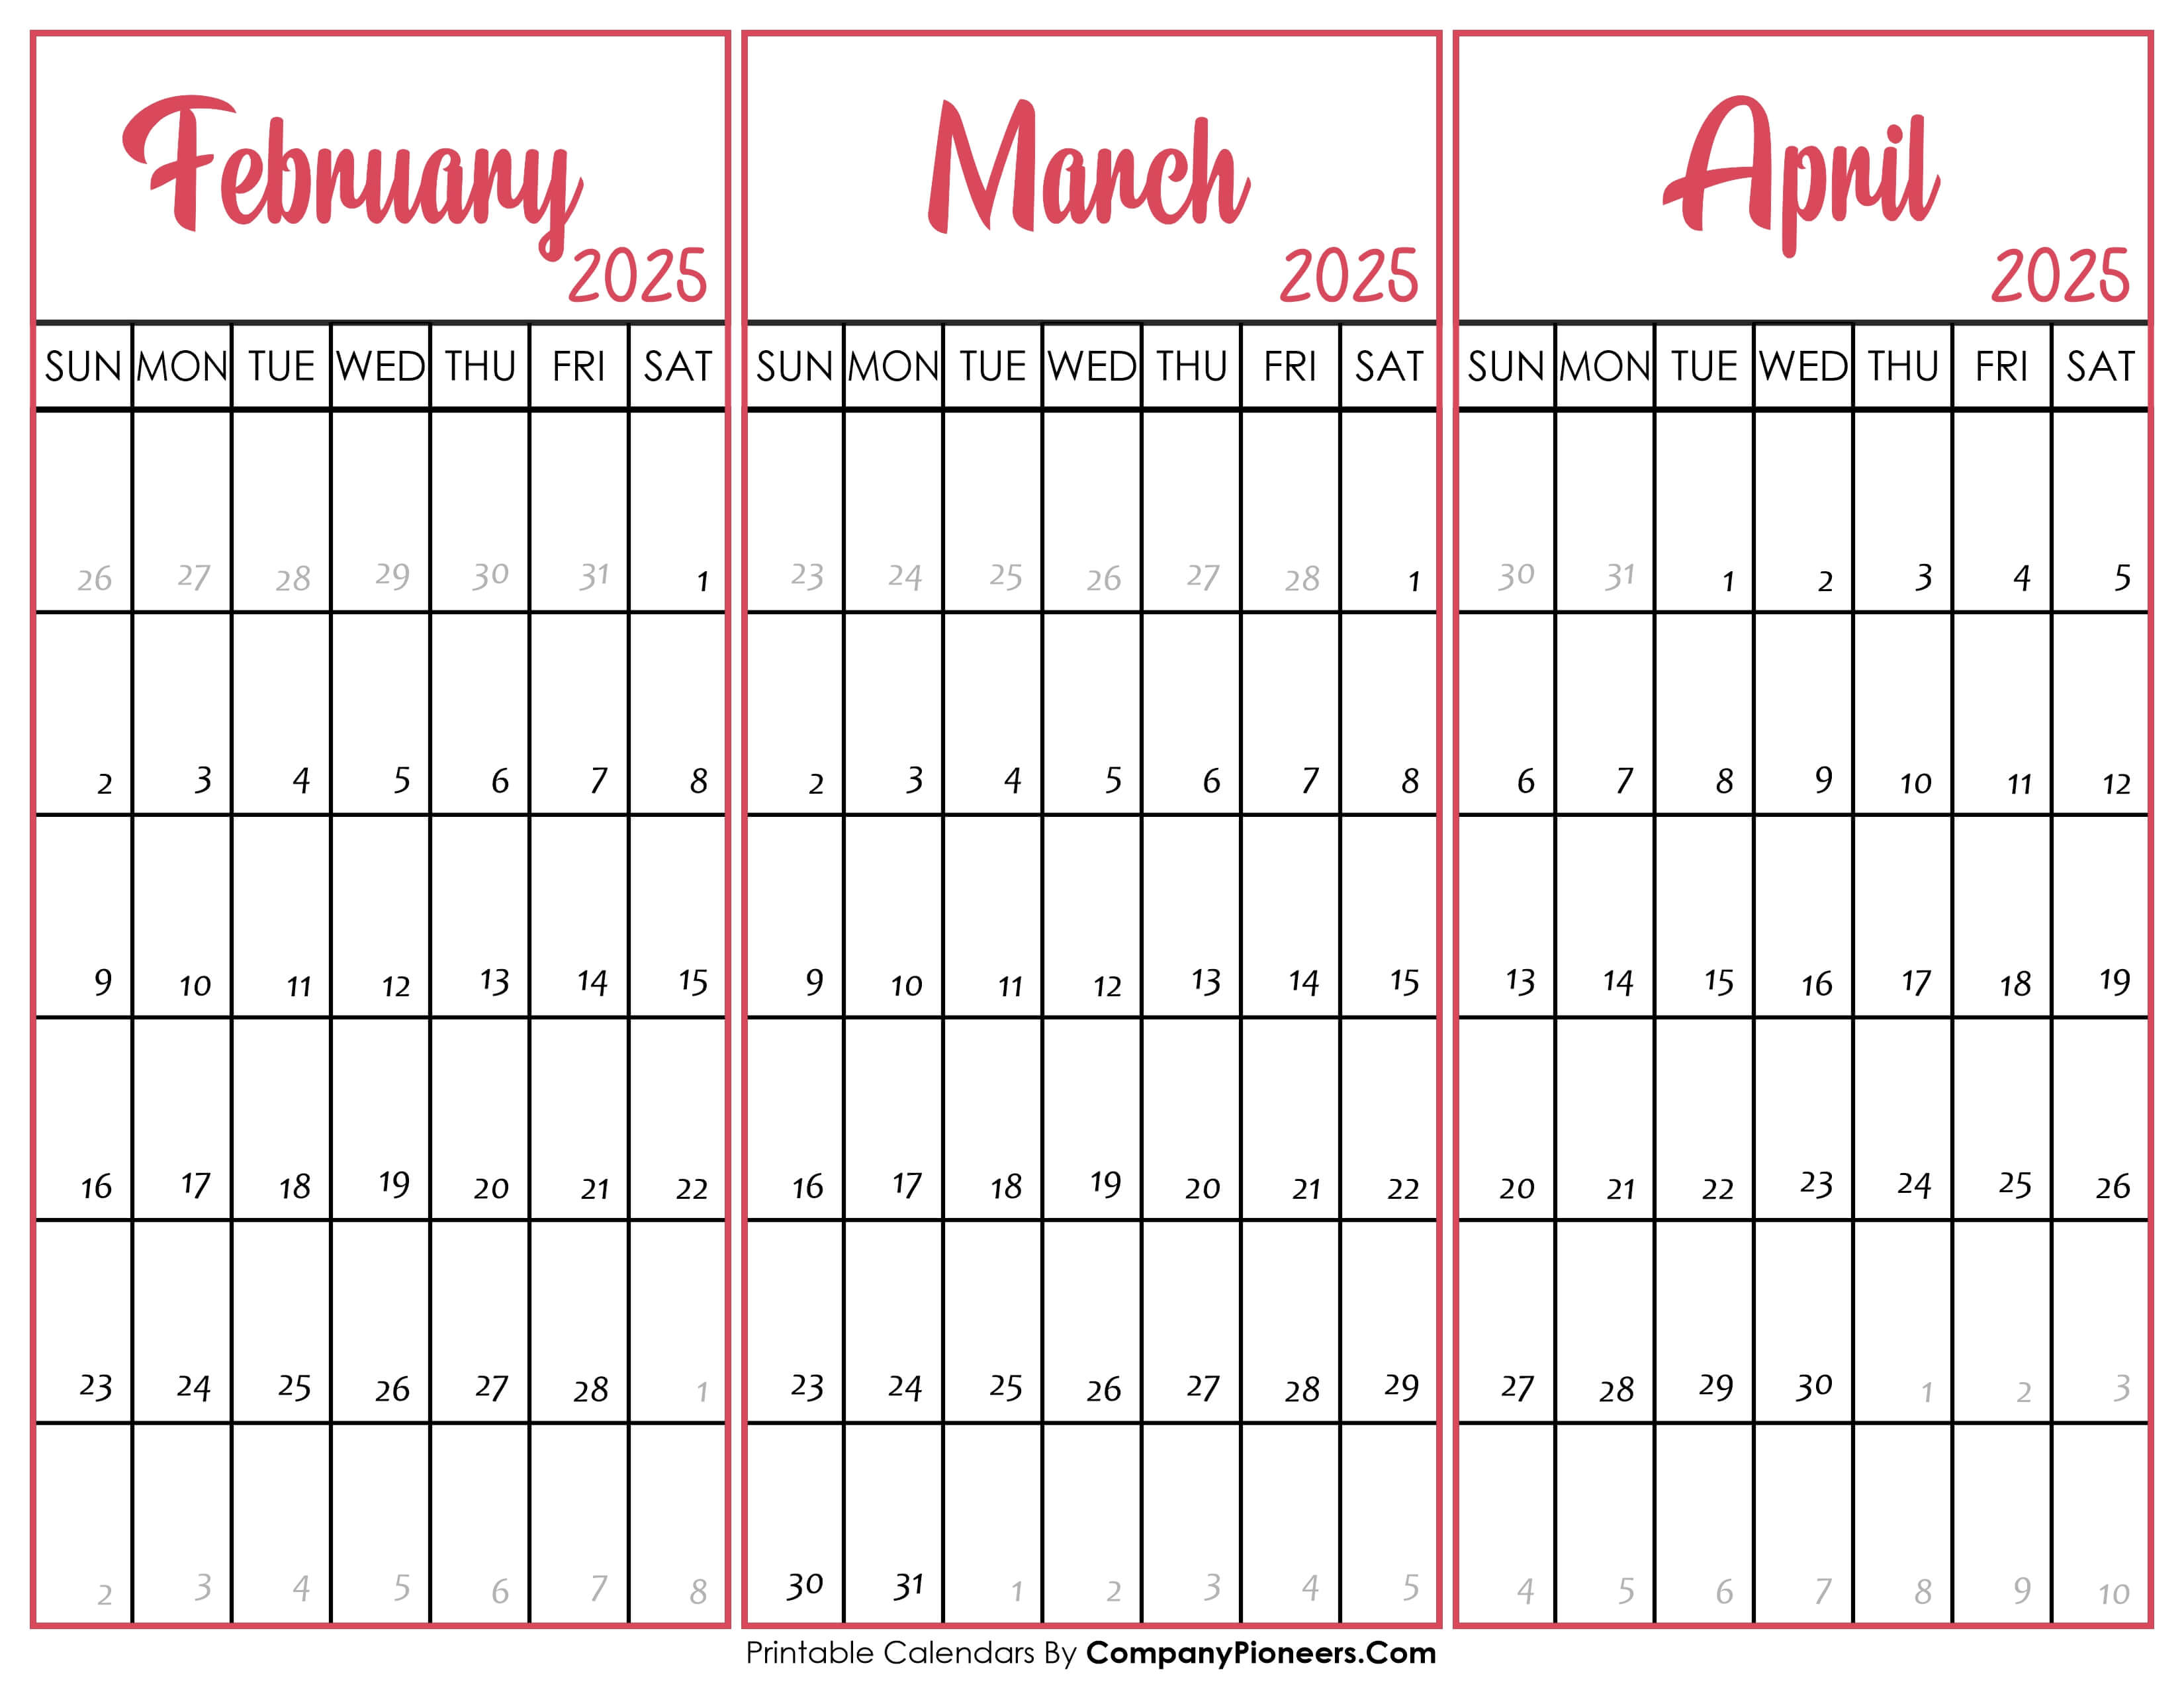 February March and April 2025 Calendar